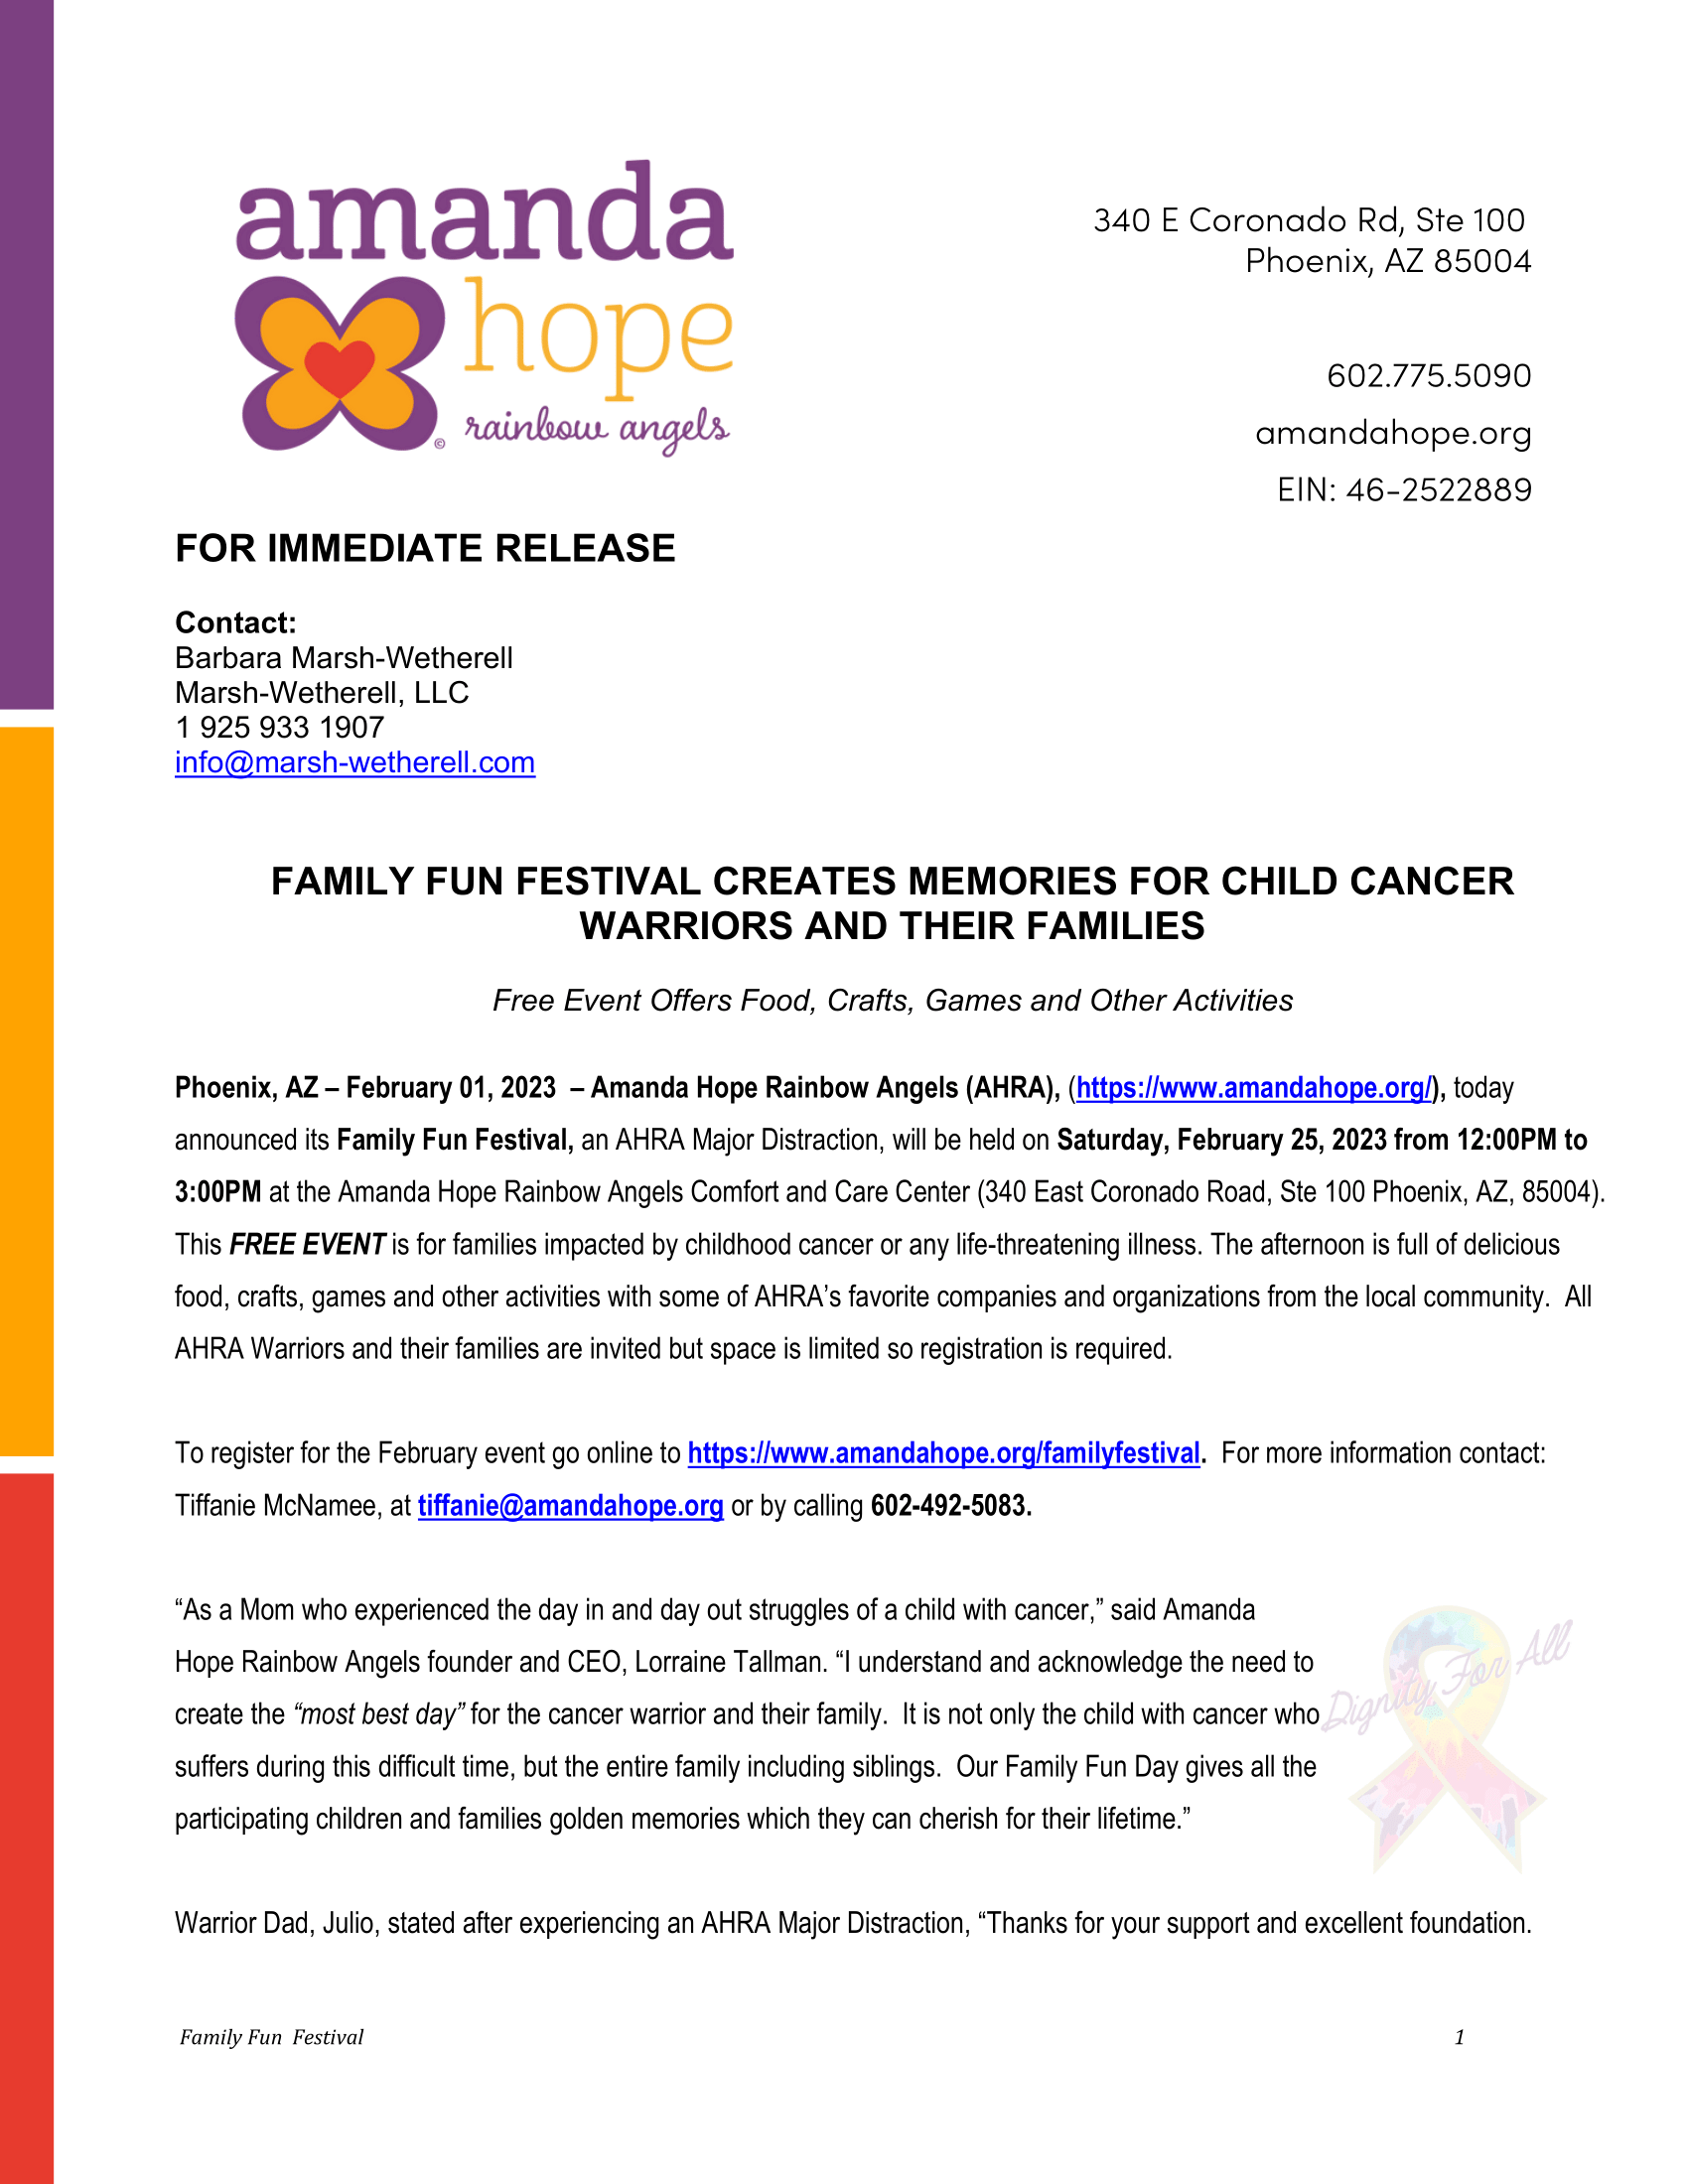 FAMILY FUN FESTIVAL CREATES MEMORIES FOR CHILD CANCER  WARRIORS AND THEIR FAMILIES